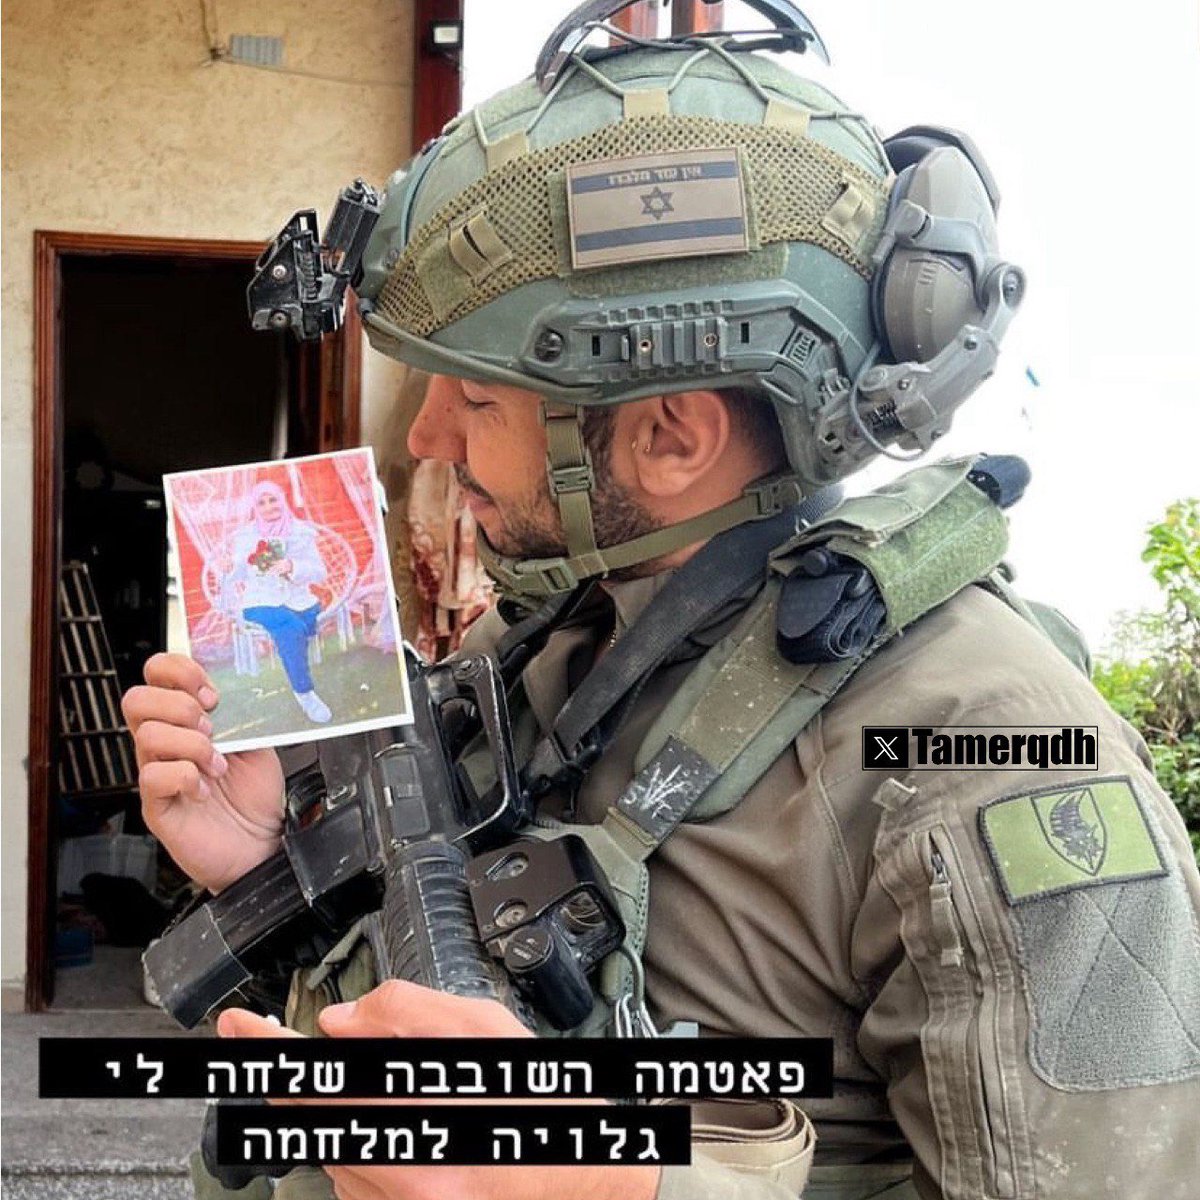 🚨 An Israeli soldier shares a picture of himself holding a photograph of a Palestinian woman from a home his unit raided in #Gaza, accompanied by disturbing and inappropriate comments about her. #GazaGenocide‌